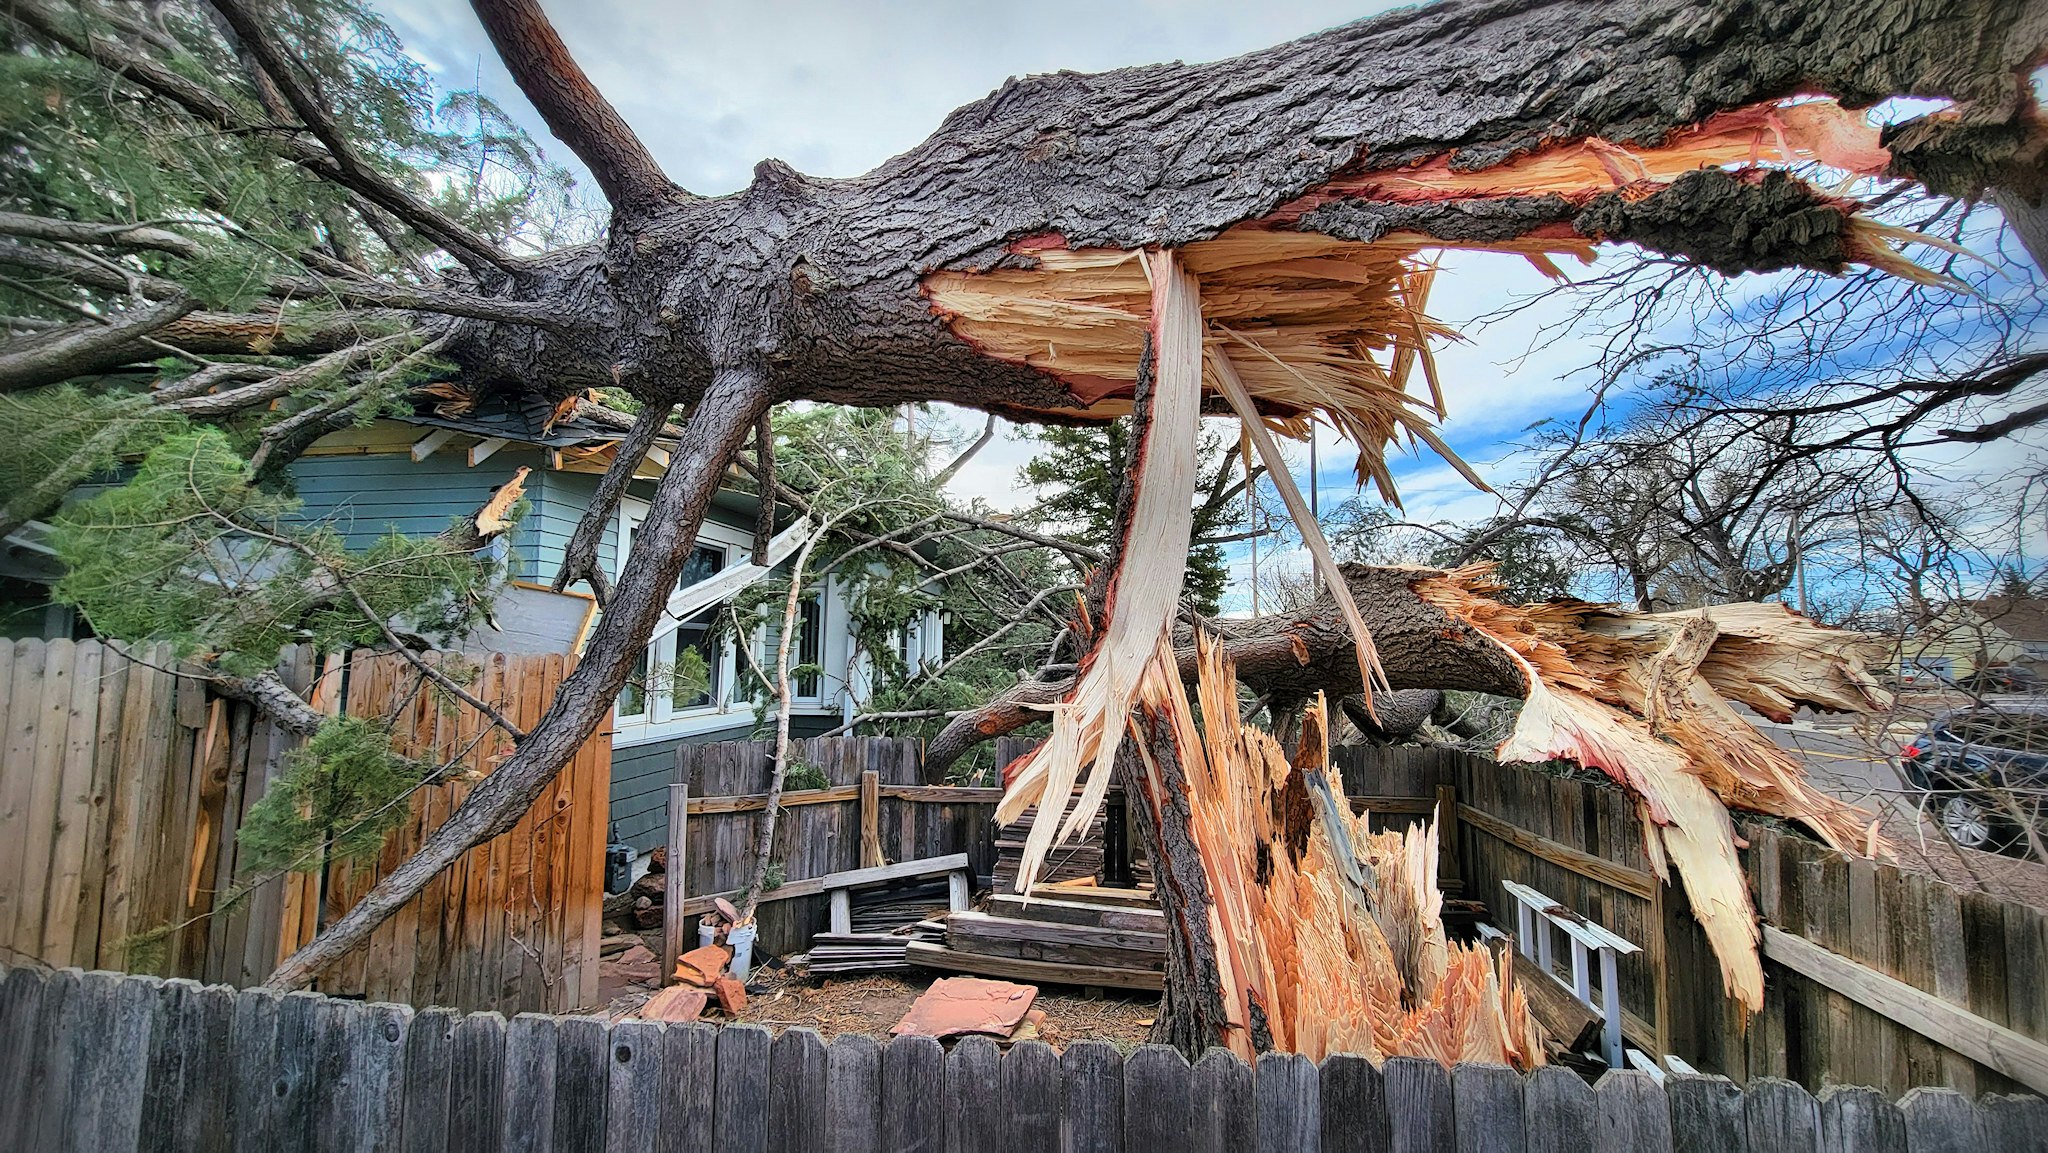 A tree described as "the biggest pine tree in Cheyenne" was felled onto a house over the weekend due to the early April wind storm.